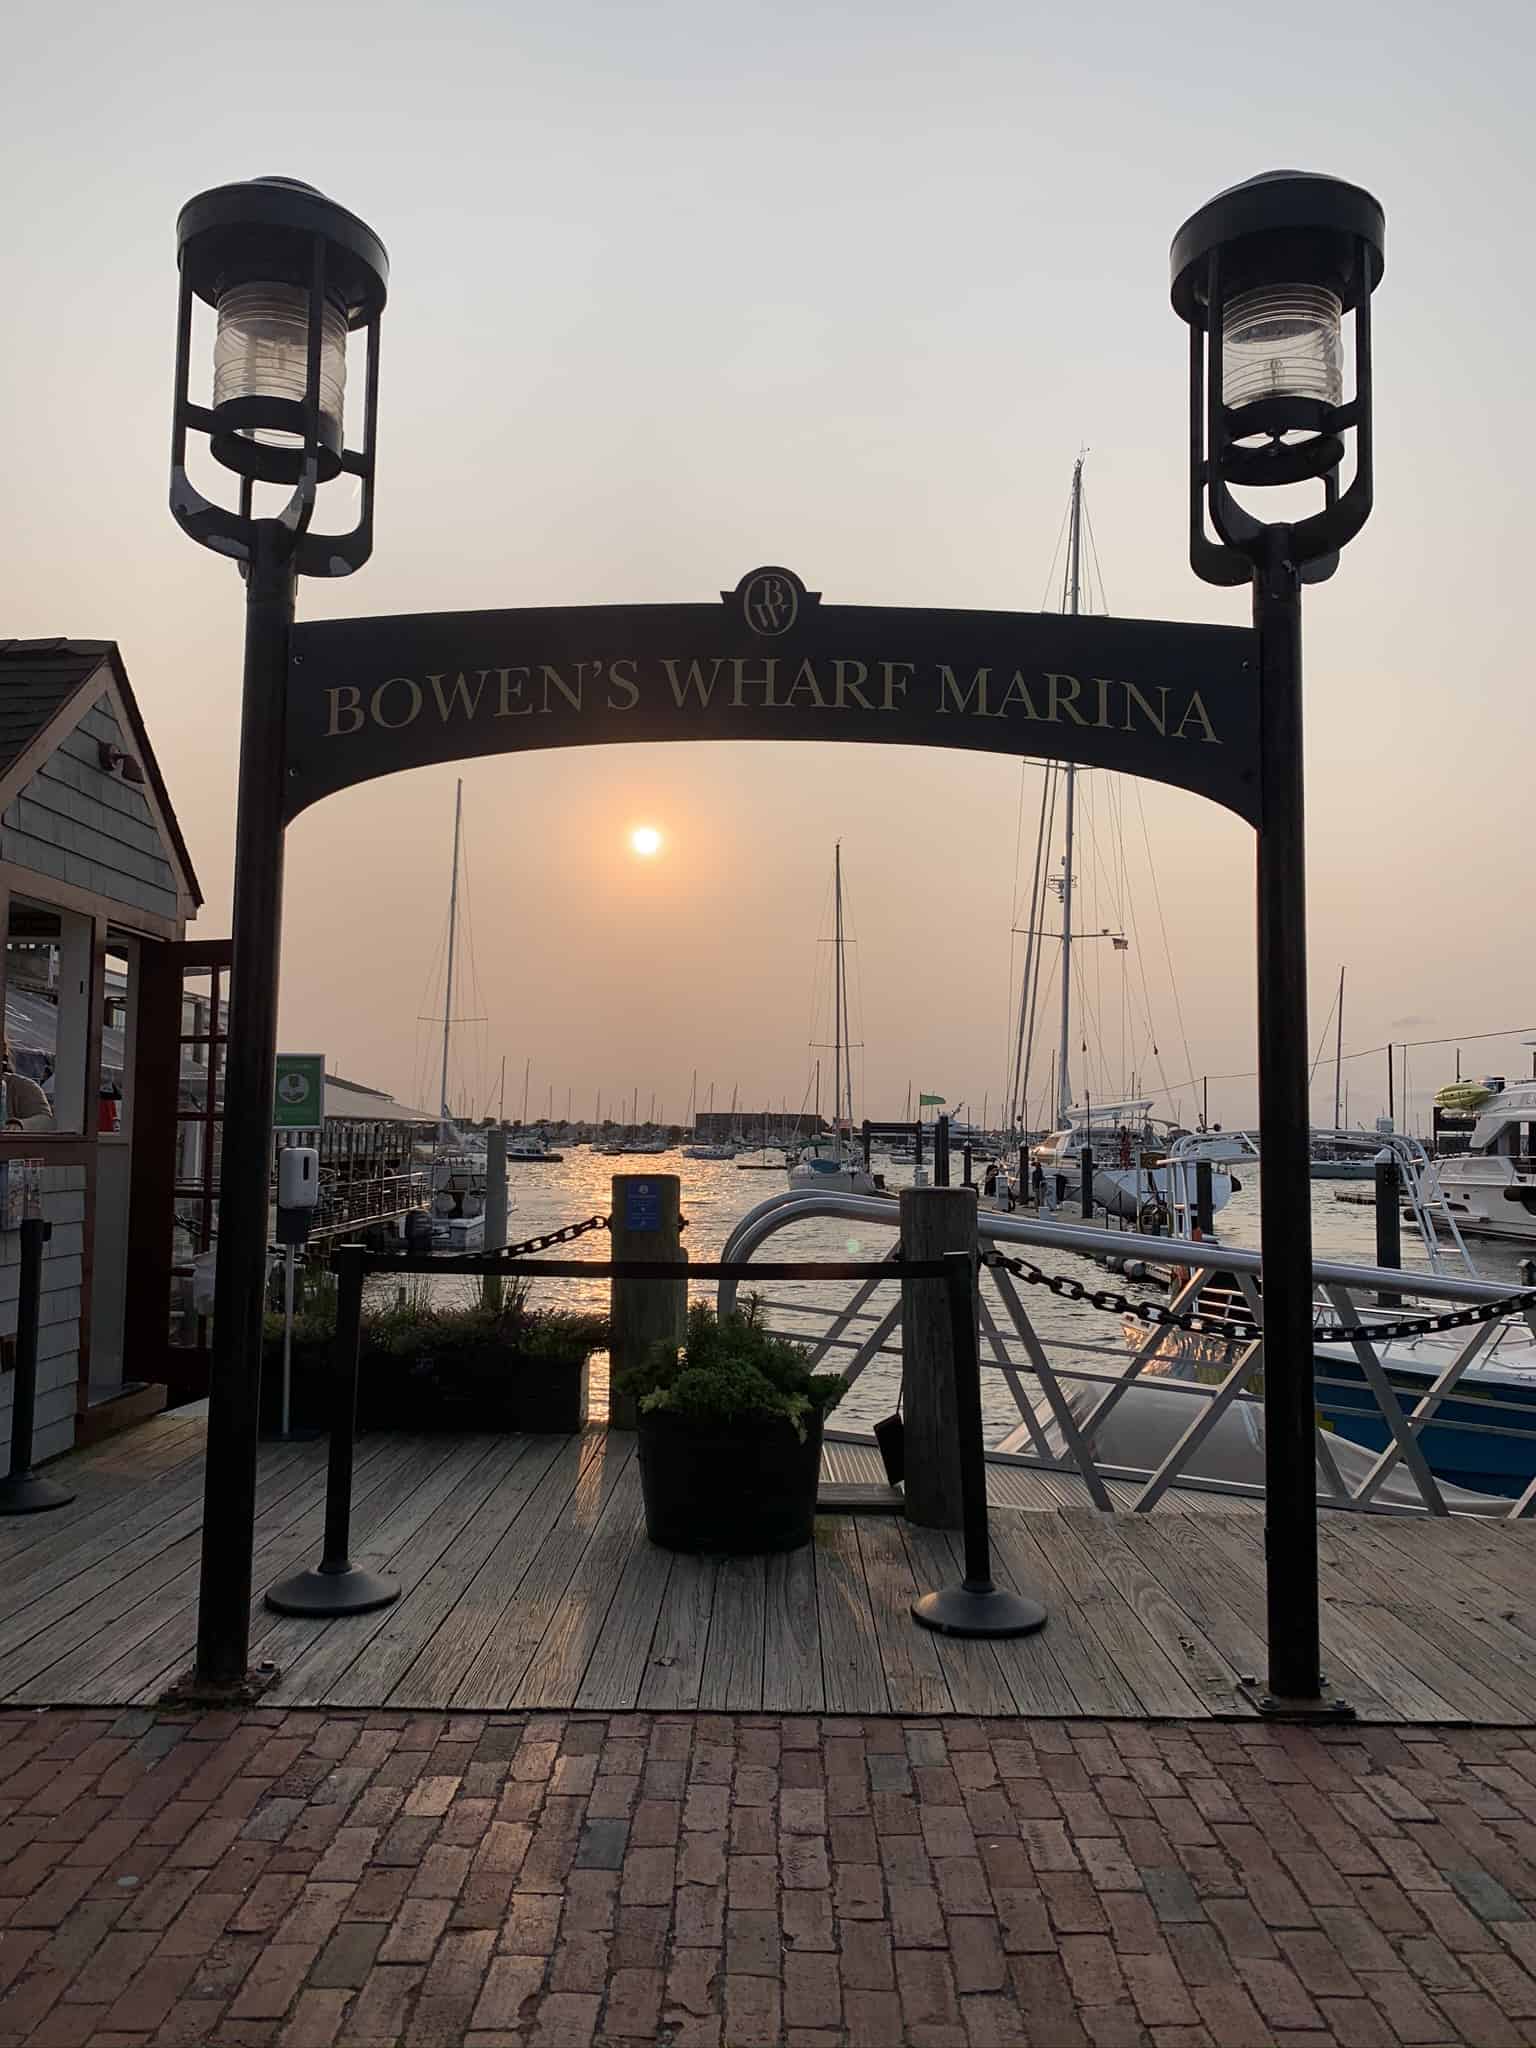 An archway at a dock with boats and a walkway with a sunrise in the distance